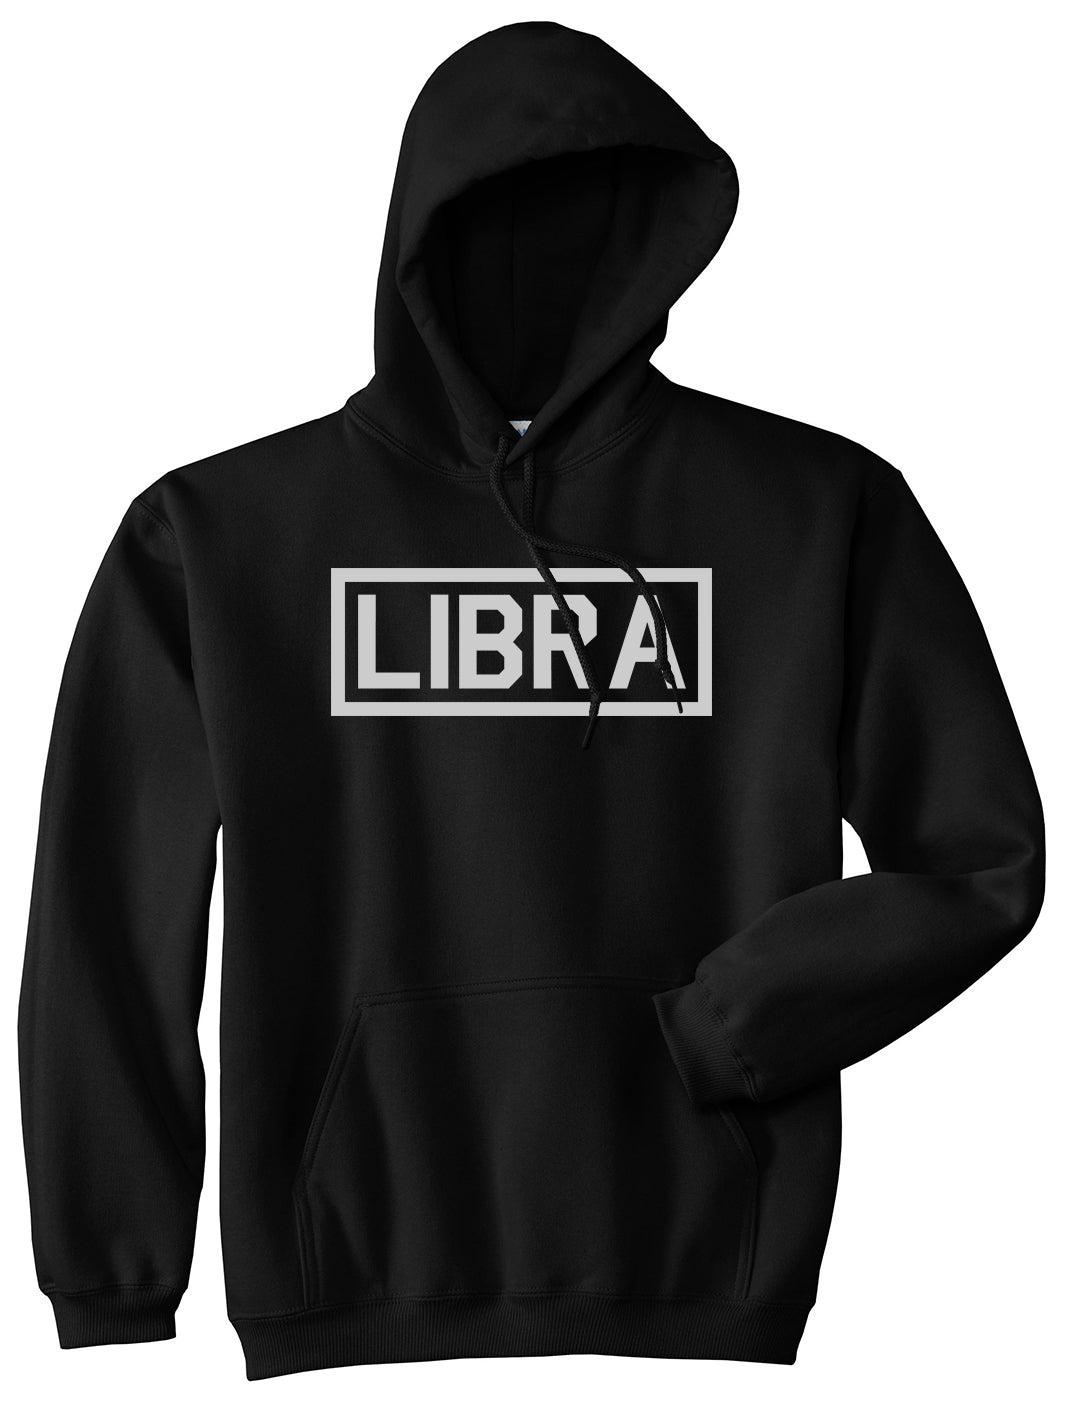 Libra Horoscope Sign Mens Black Pullover Hoodie by KINGS OF NY